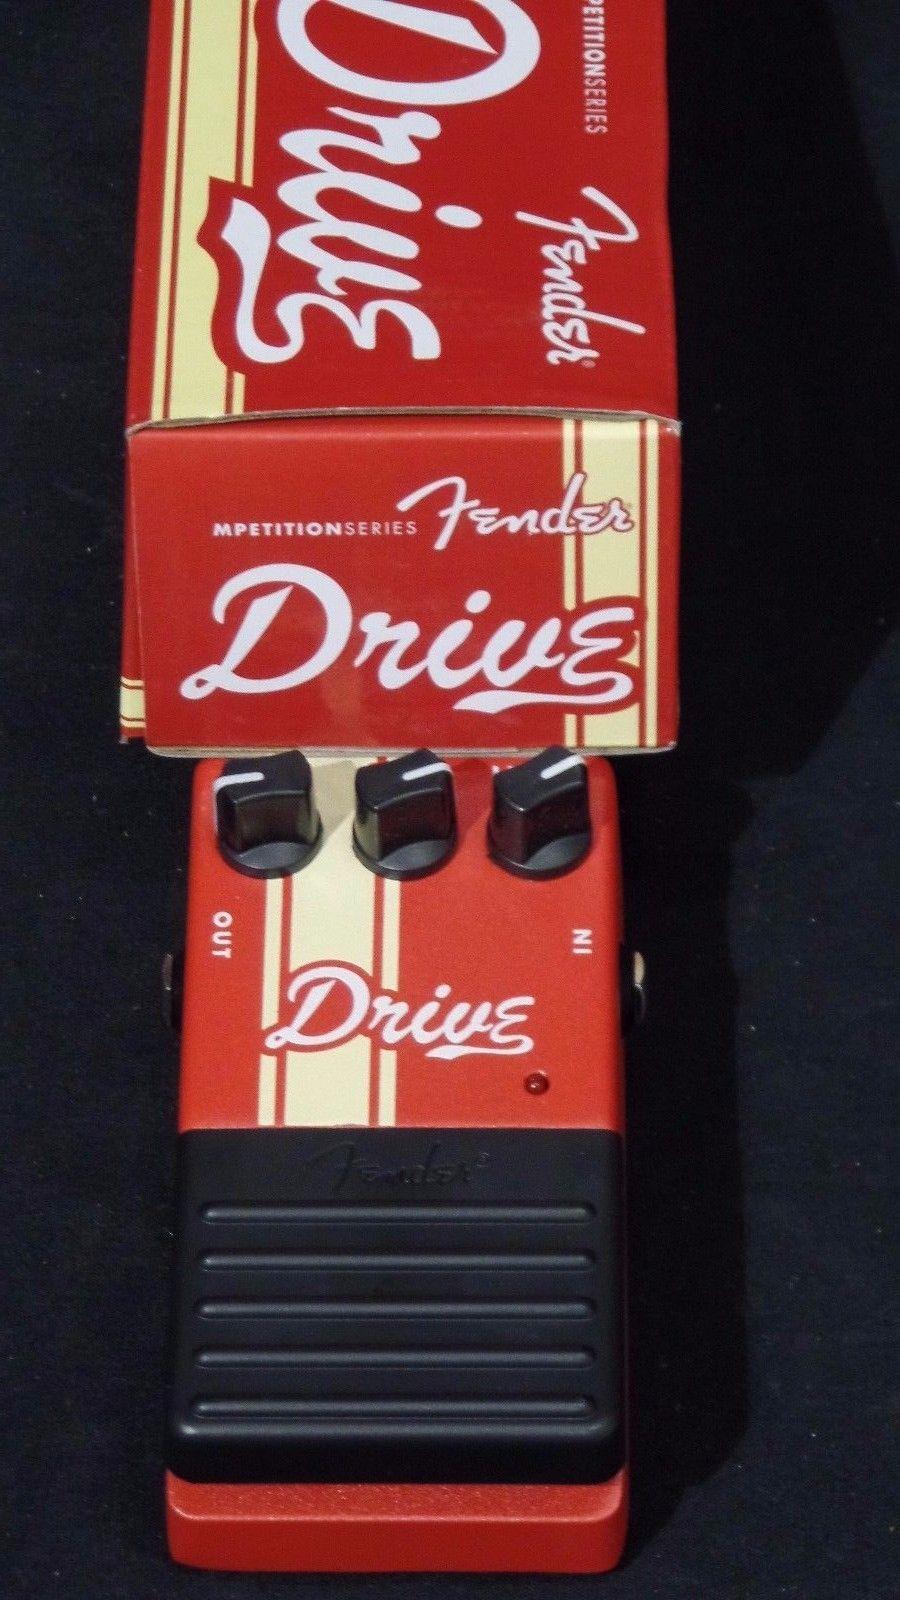 Fender Drive Electric Guitar Overdrive Effects FX Pedal #6404*